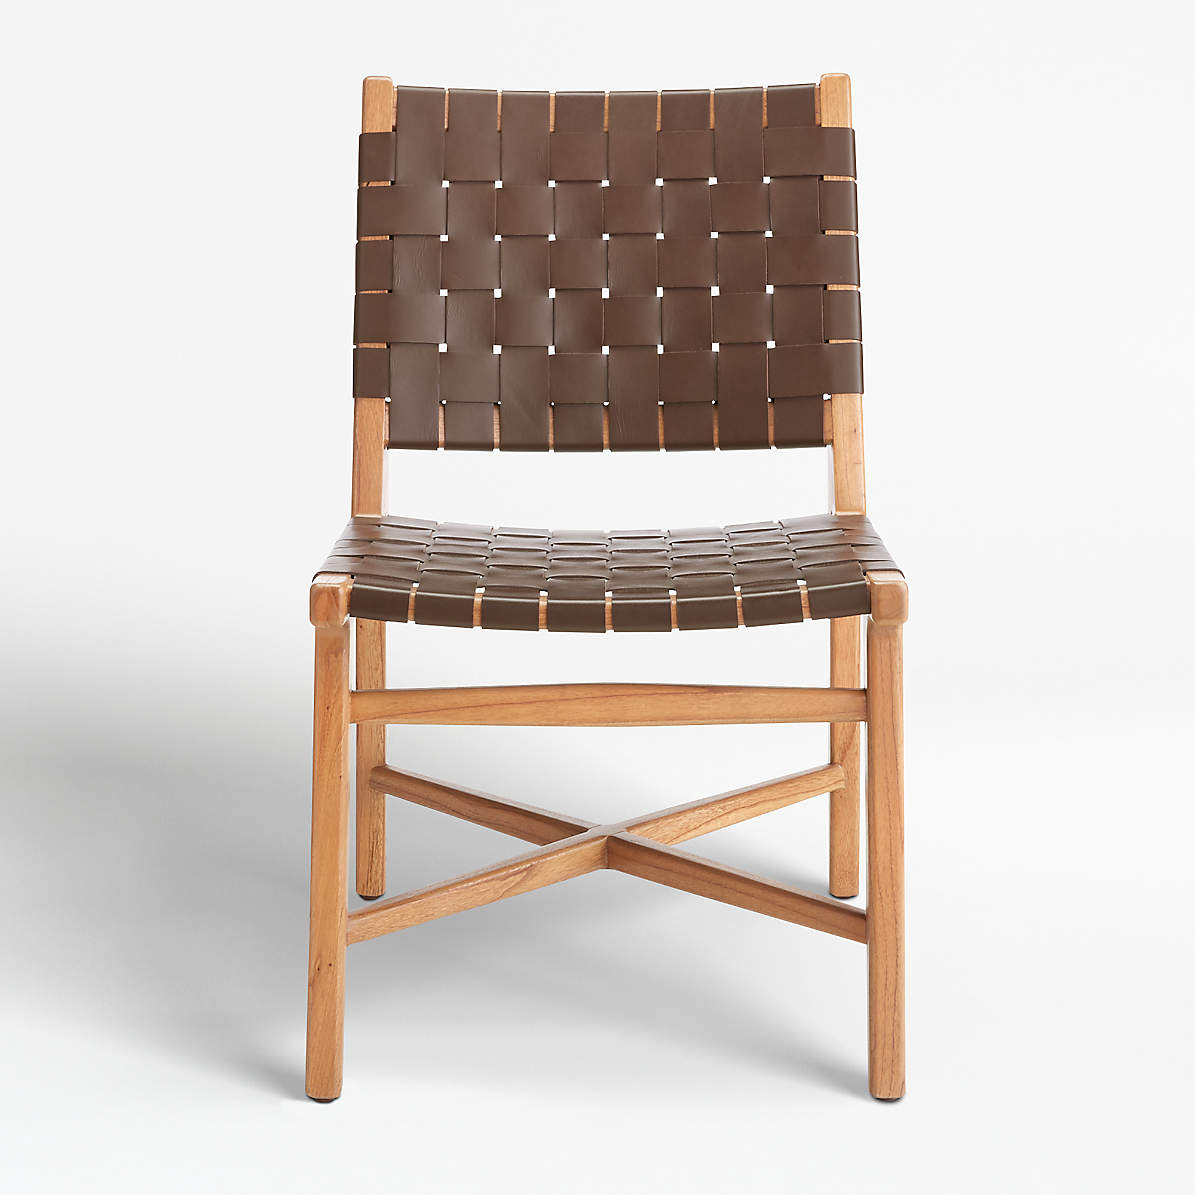 Taj Brown Woven Leather Dining Chair, Leather Kitchen Chairs Canada